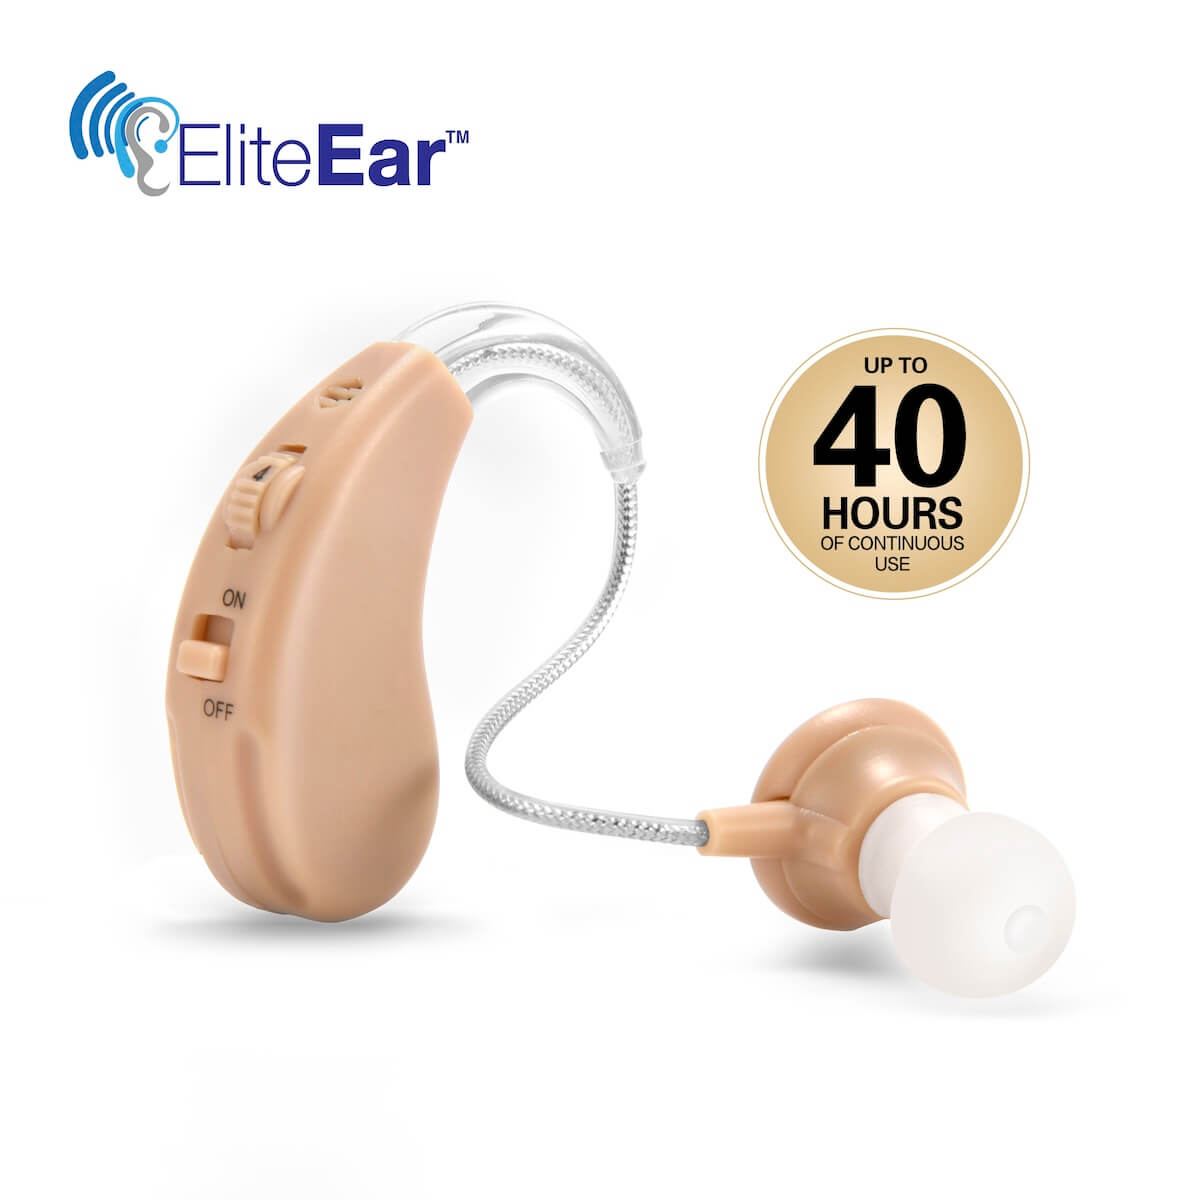 EliteEar™️ Sound Amplifier - up to 40 hours of continuous use